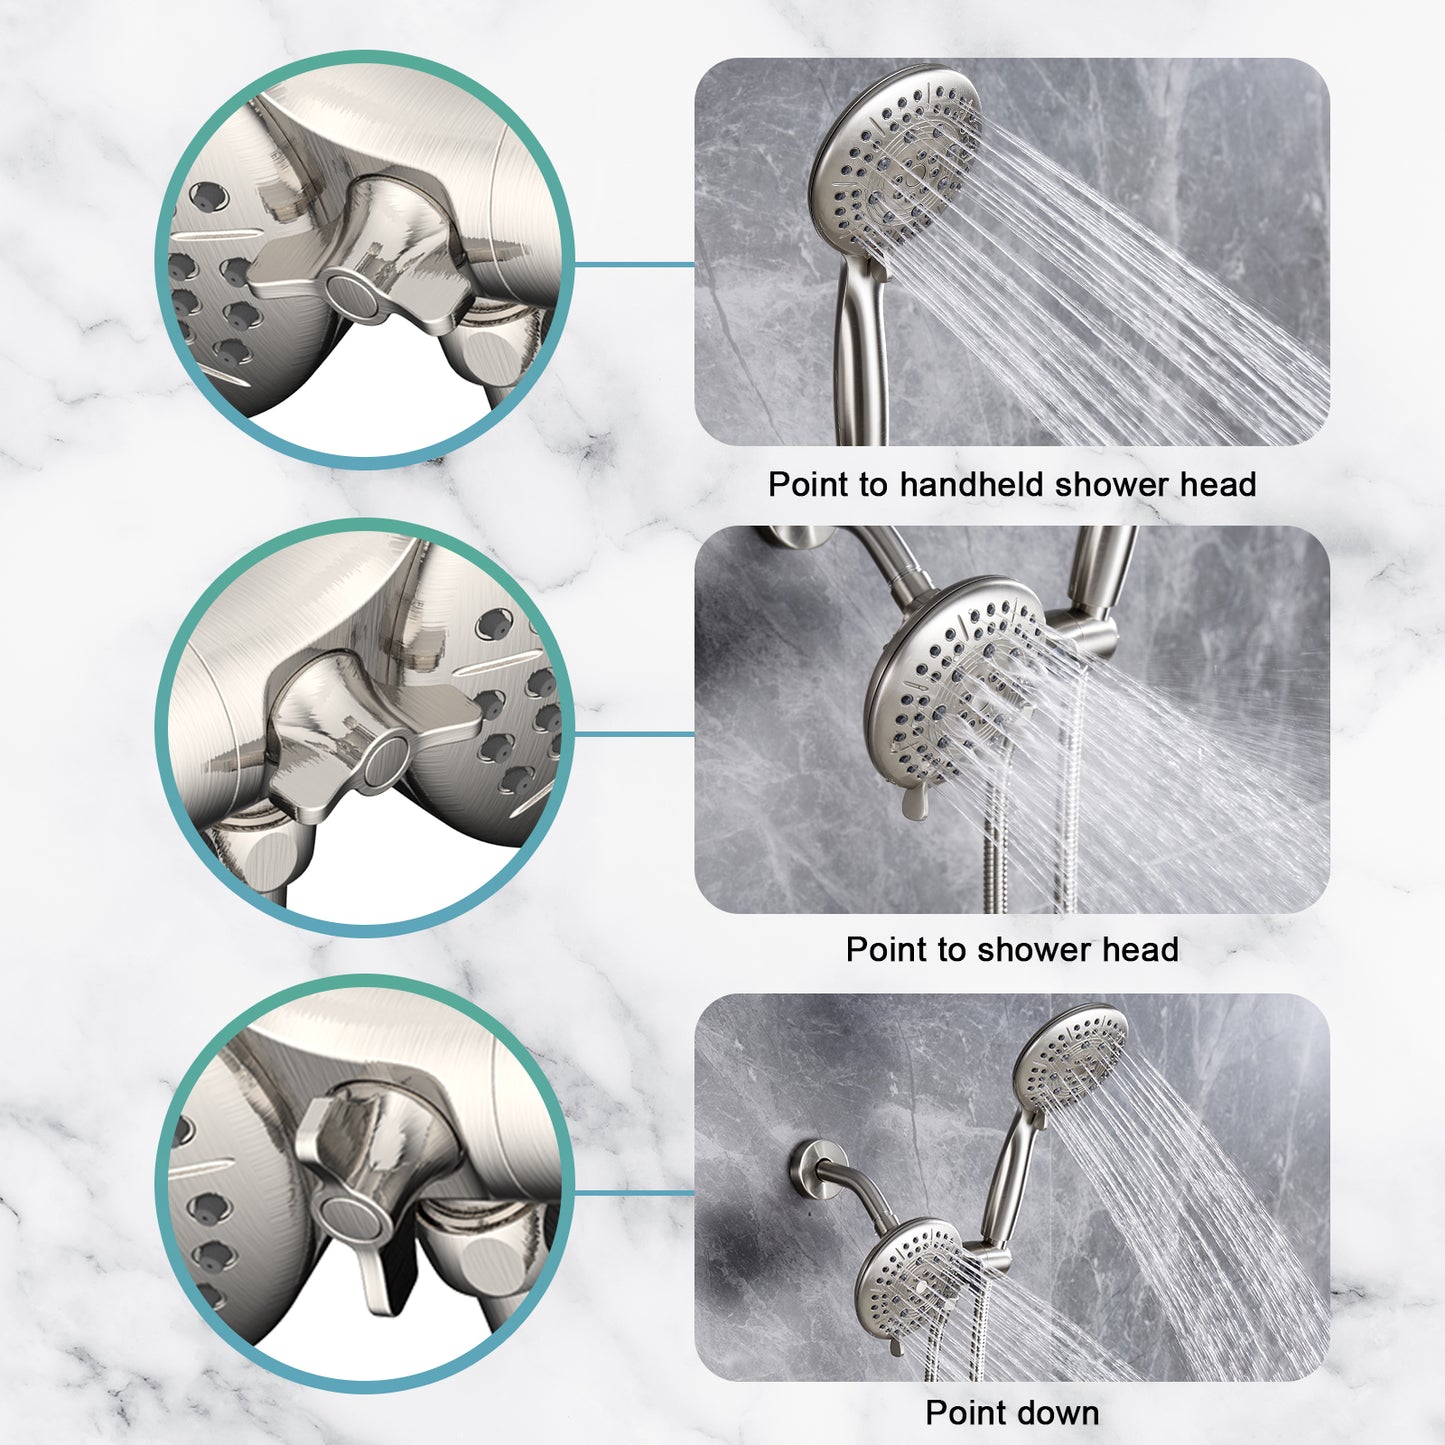 Cobbe 48-Setting High Pressure 3-Way Shower Head Combo, Hand Held Shower & Rain Shower Separately or Together, 4.7" Dual 2 in 1 Showerhead with Stainless Steel Hose - U.S. Invention Patents